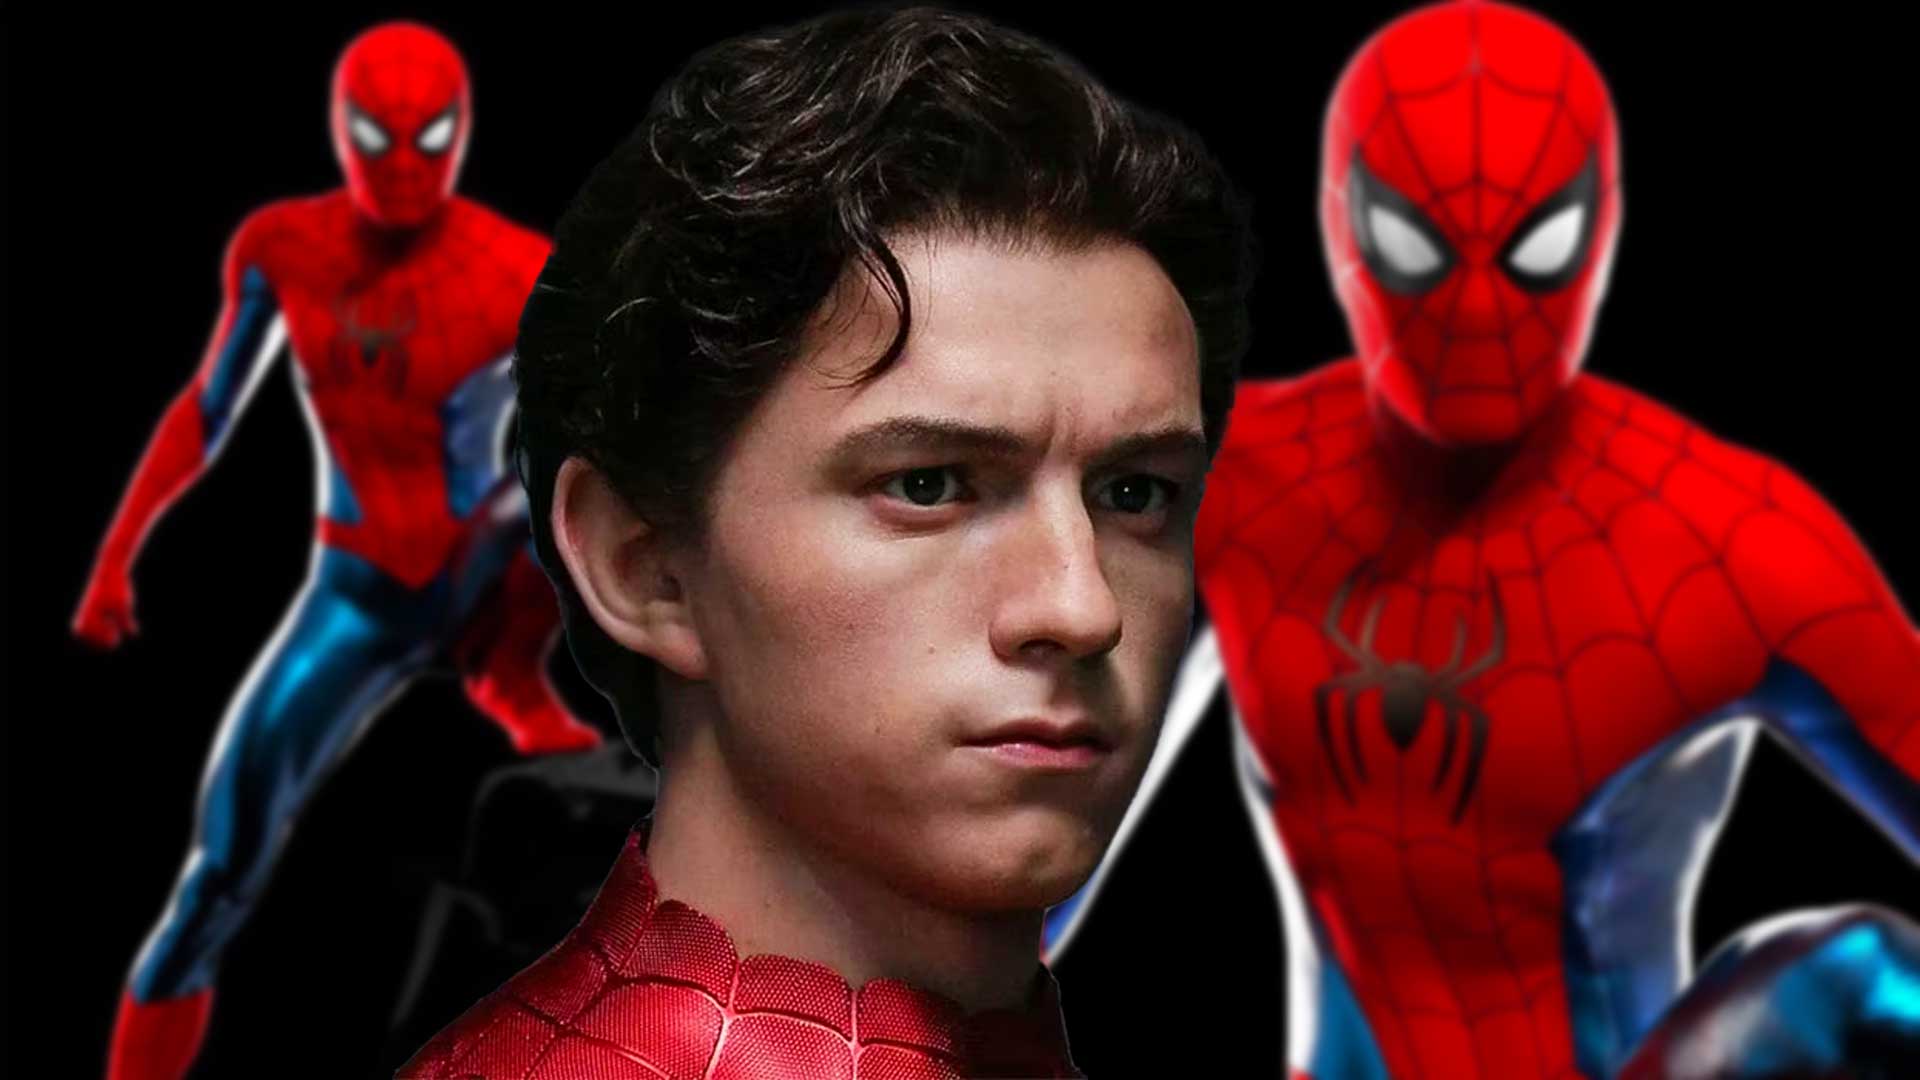 Spider-Man 4 with Tom Holland confirmed: Kevin Feige Announces